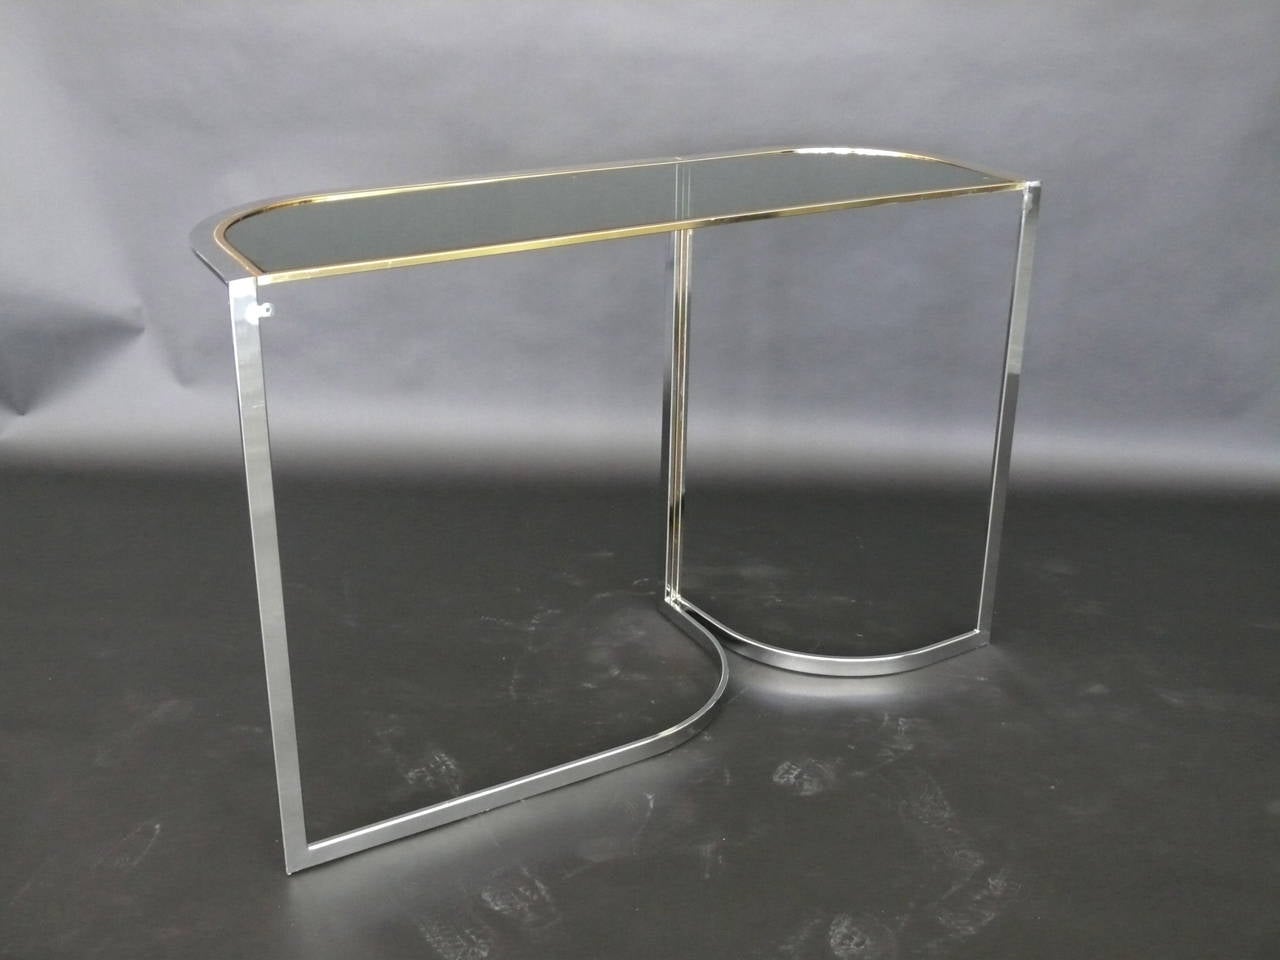 Sleek Italian console table. Chrome base has great lines and form. Original black inlaid glass with brass trim. Table is in excellent vintage condition.